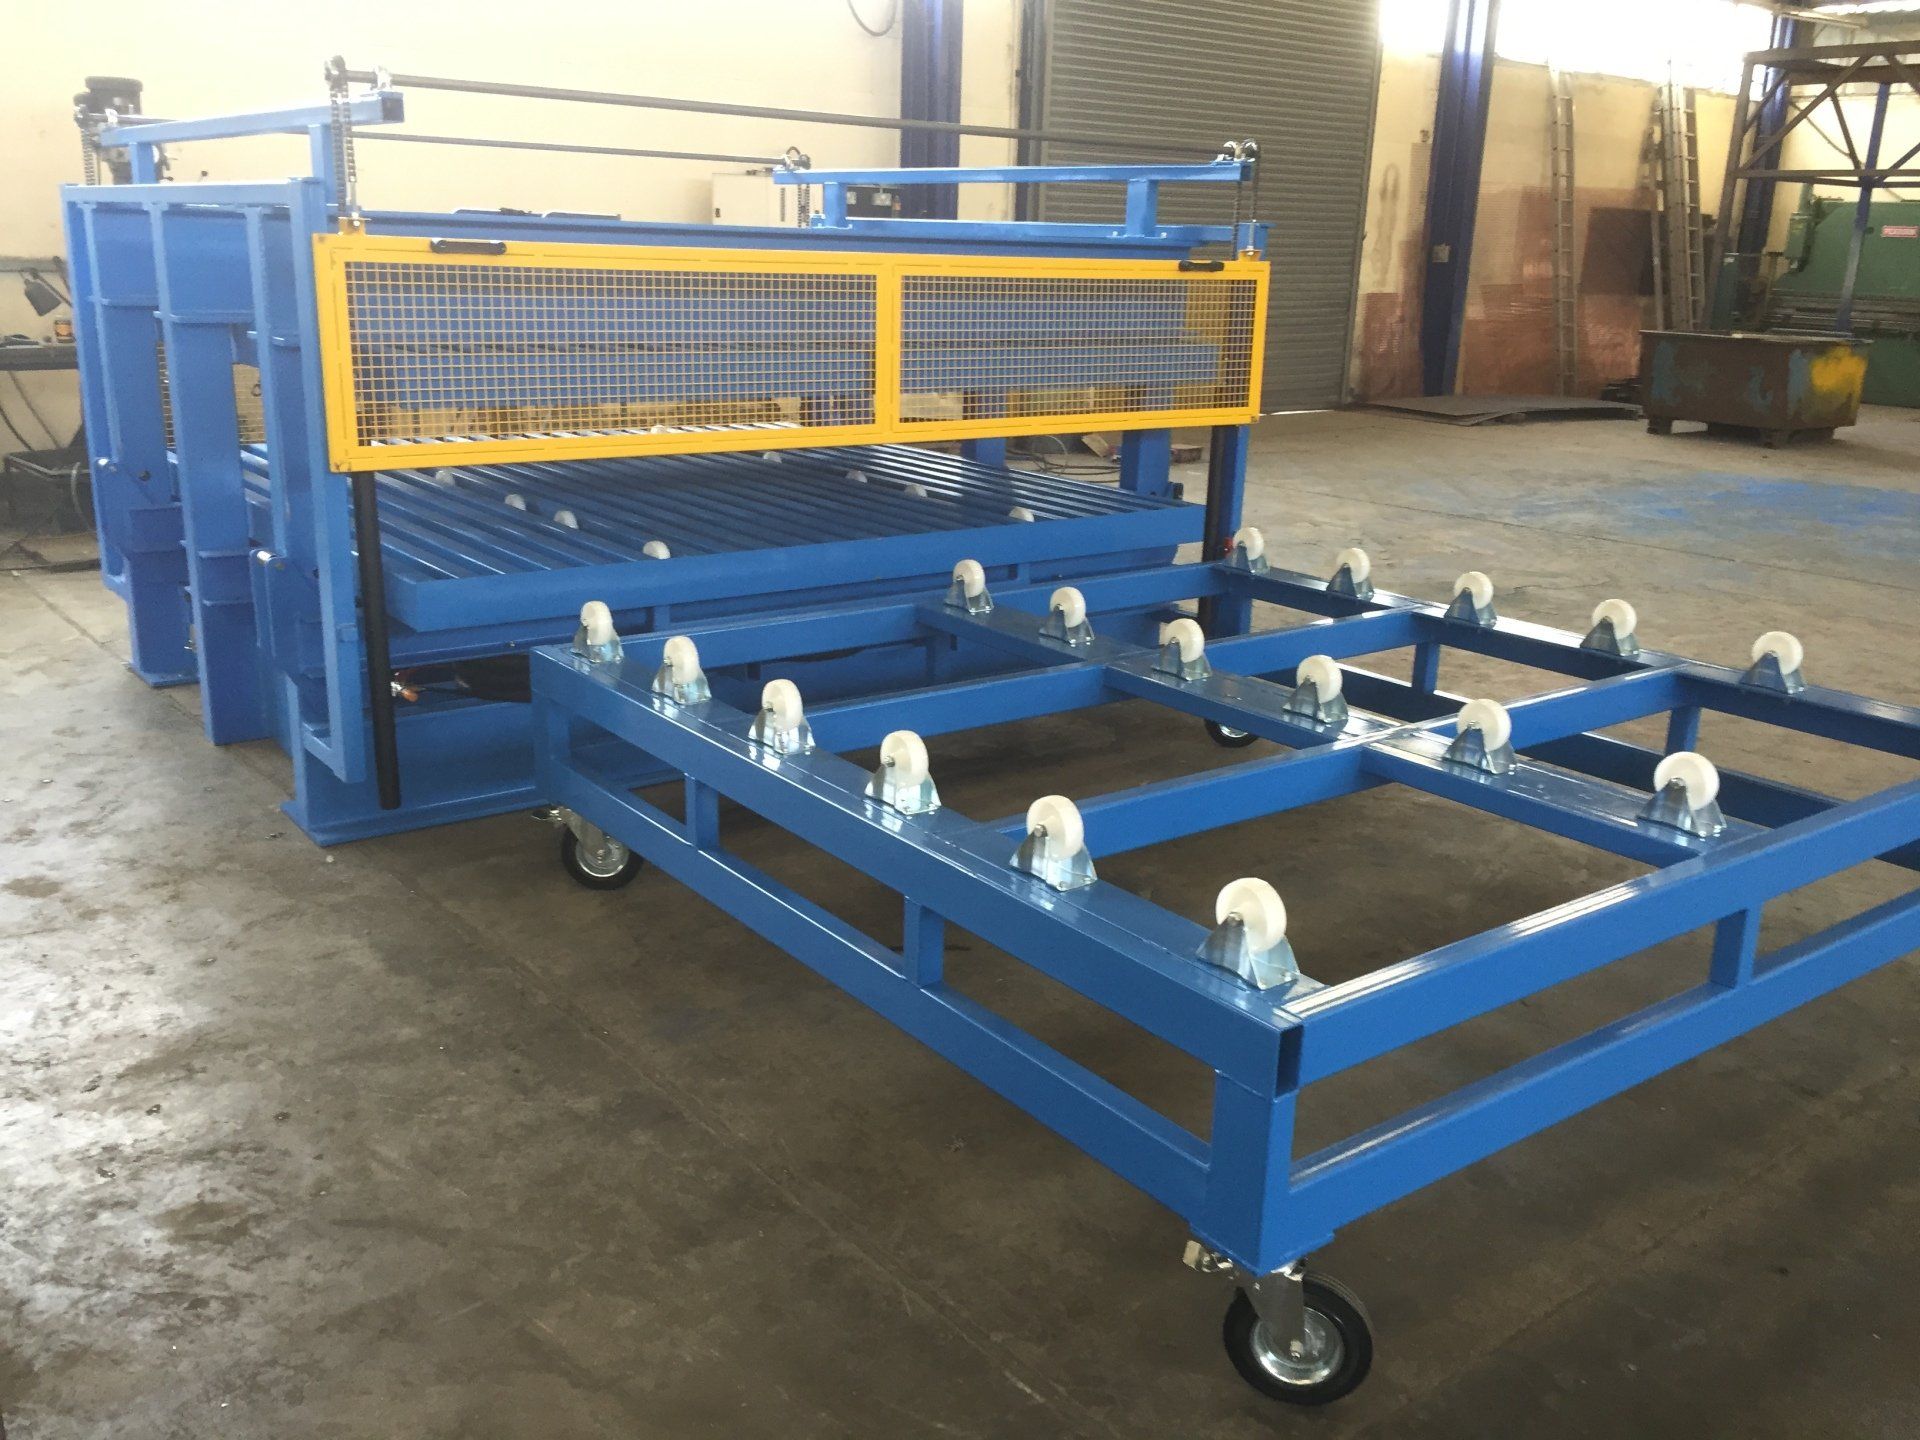 Wrapping equipment